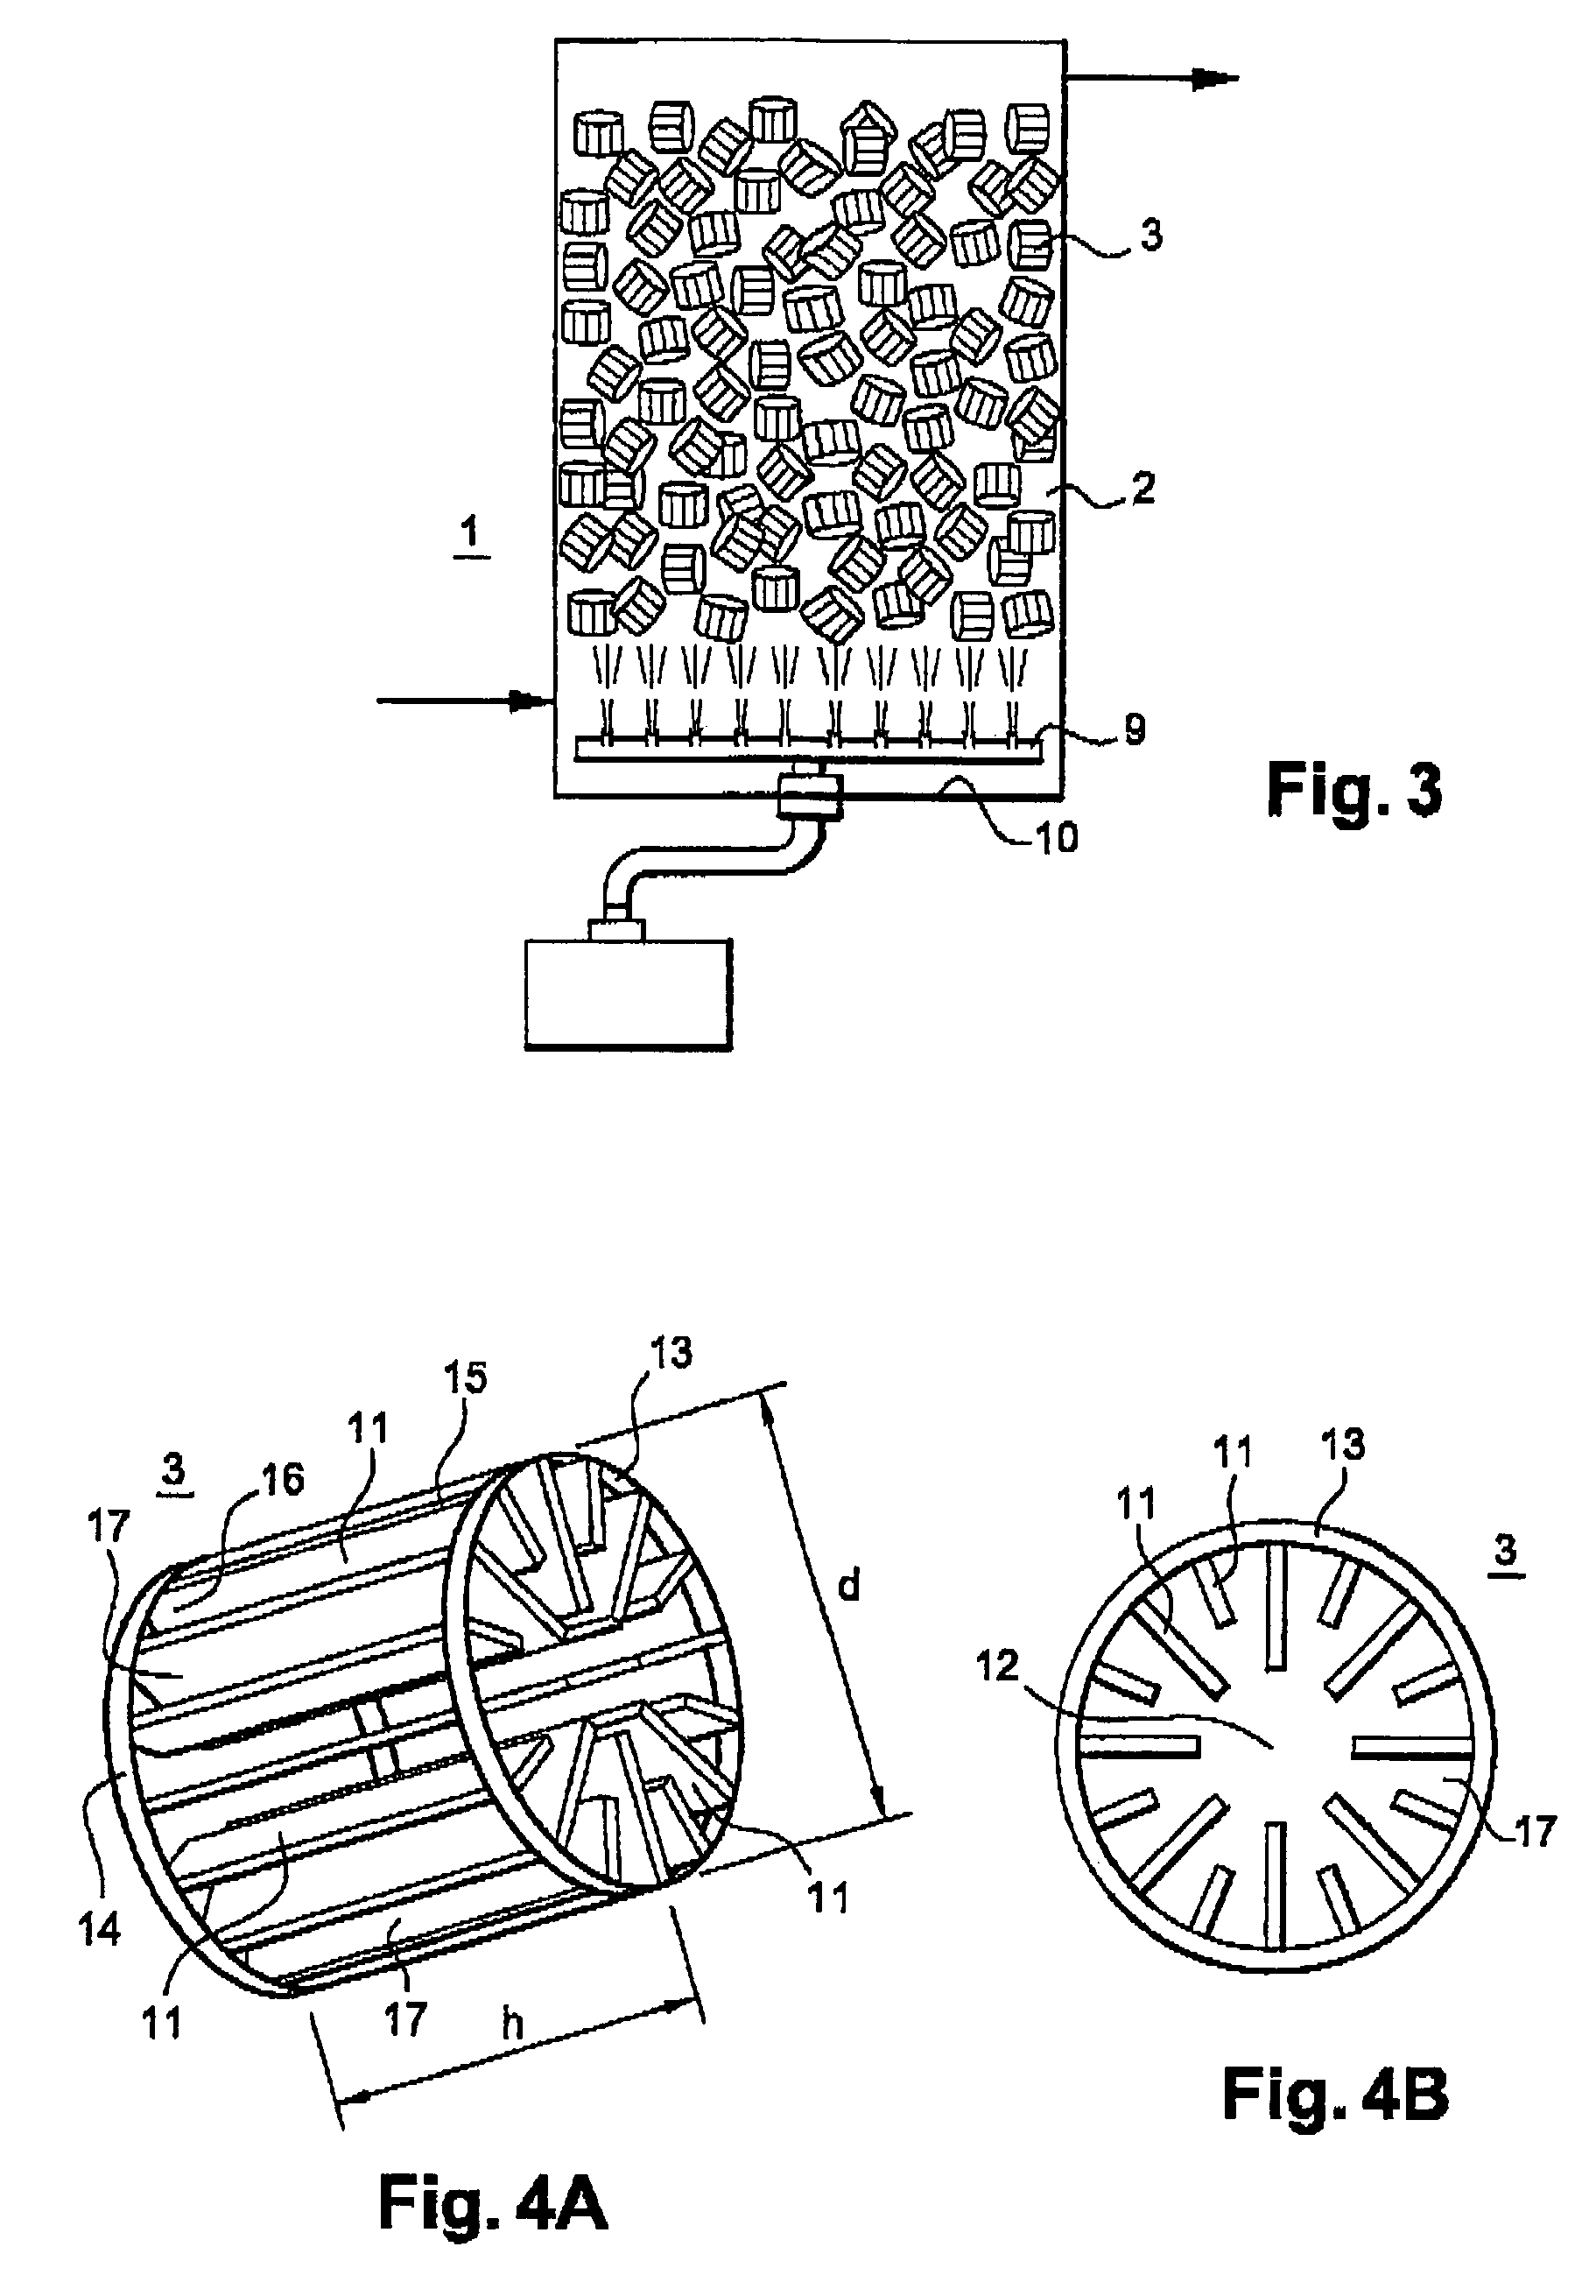 Method for purifying effluent in an anaerobic reactor